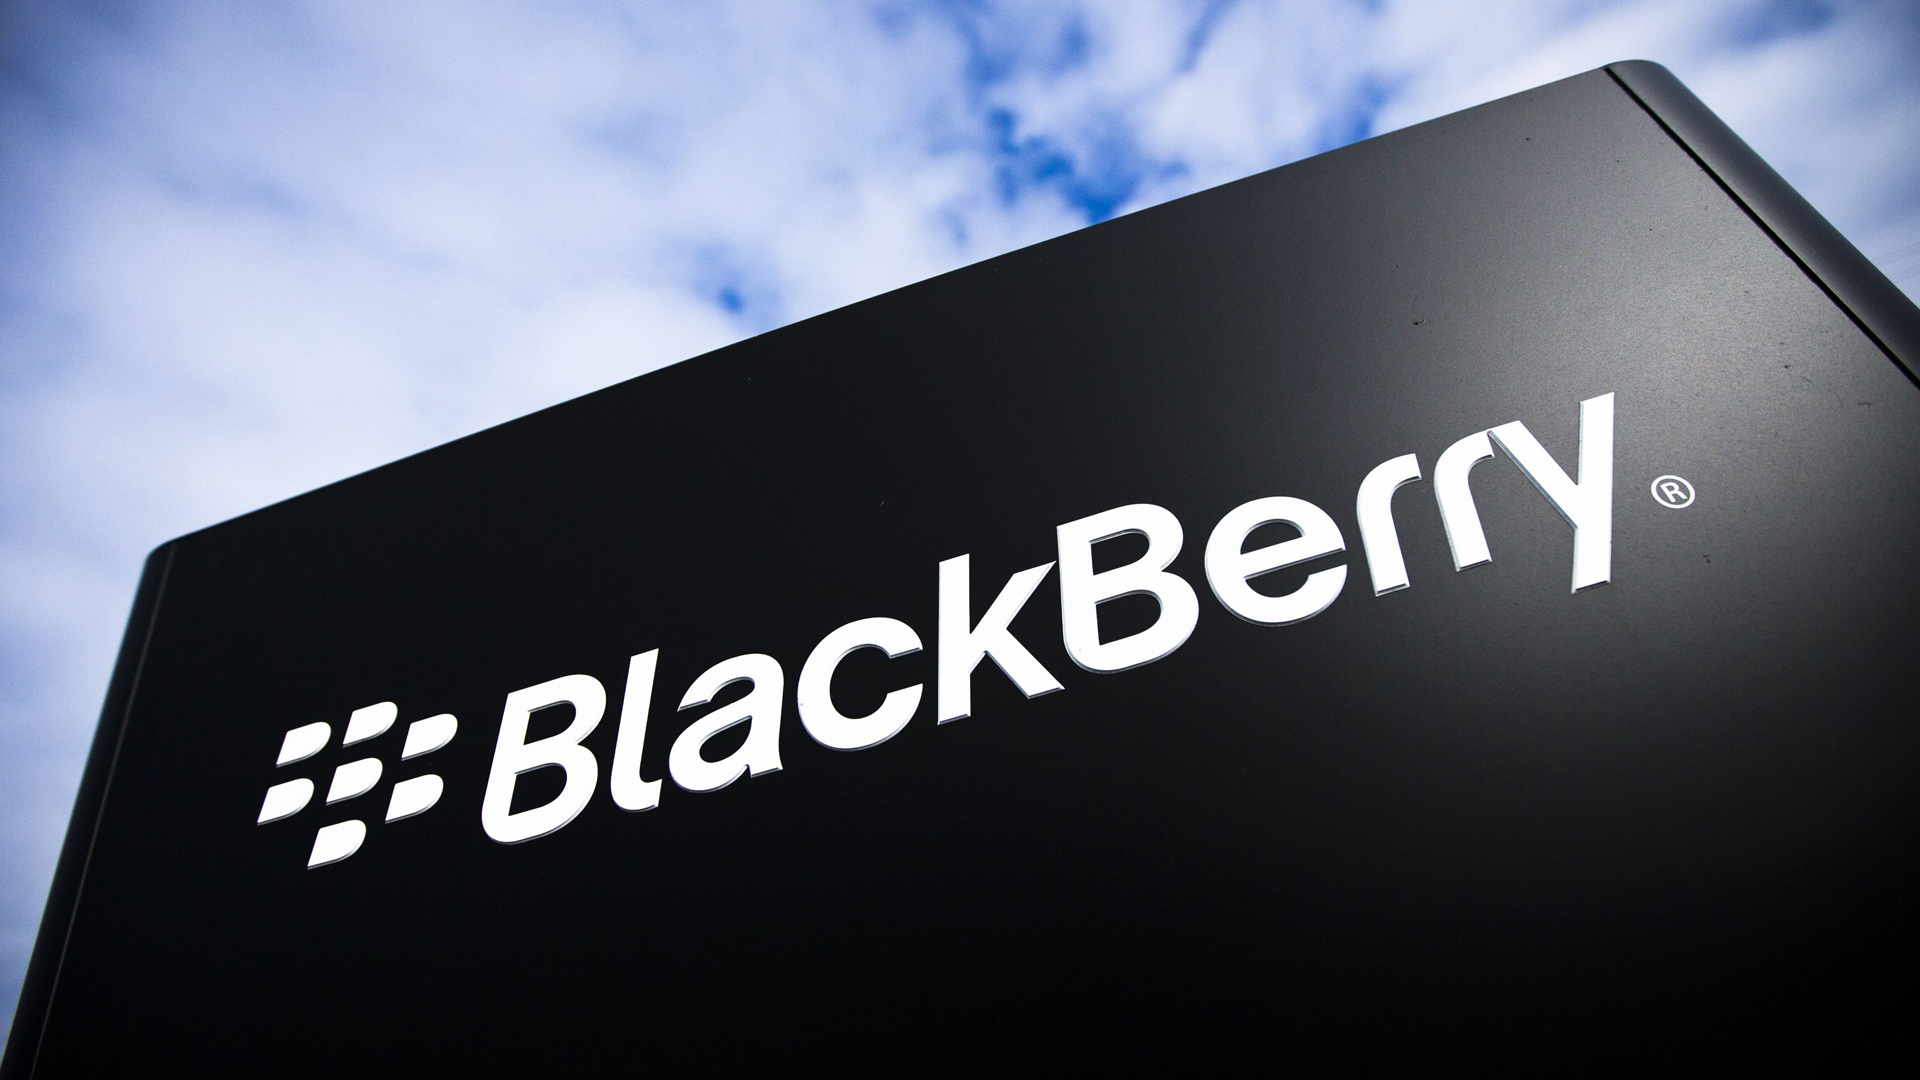 BlackBerry announces second Android-based smartphone